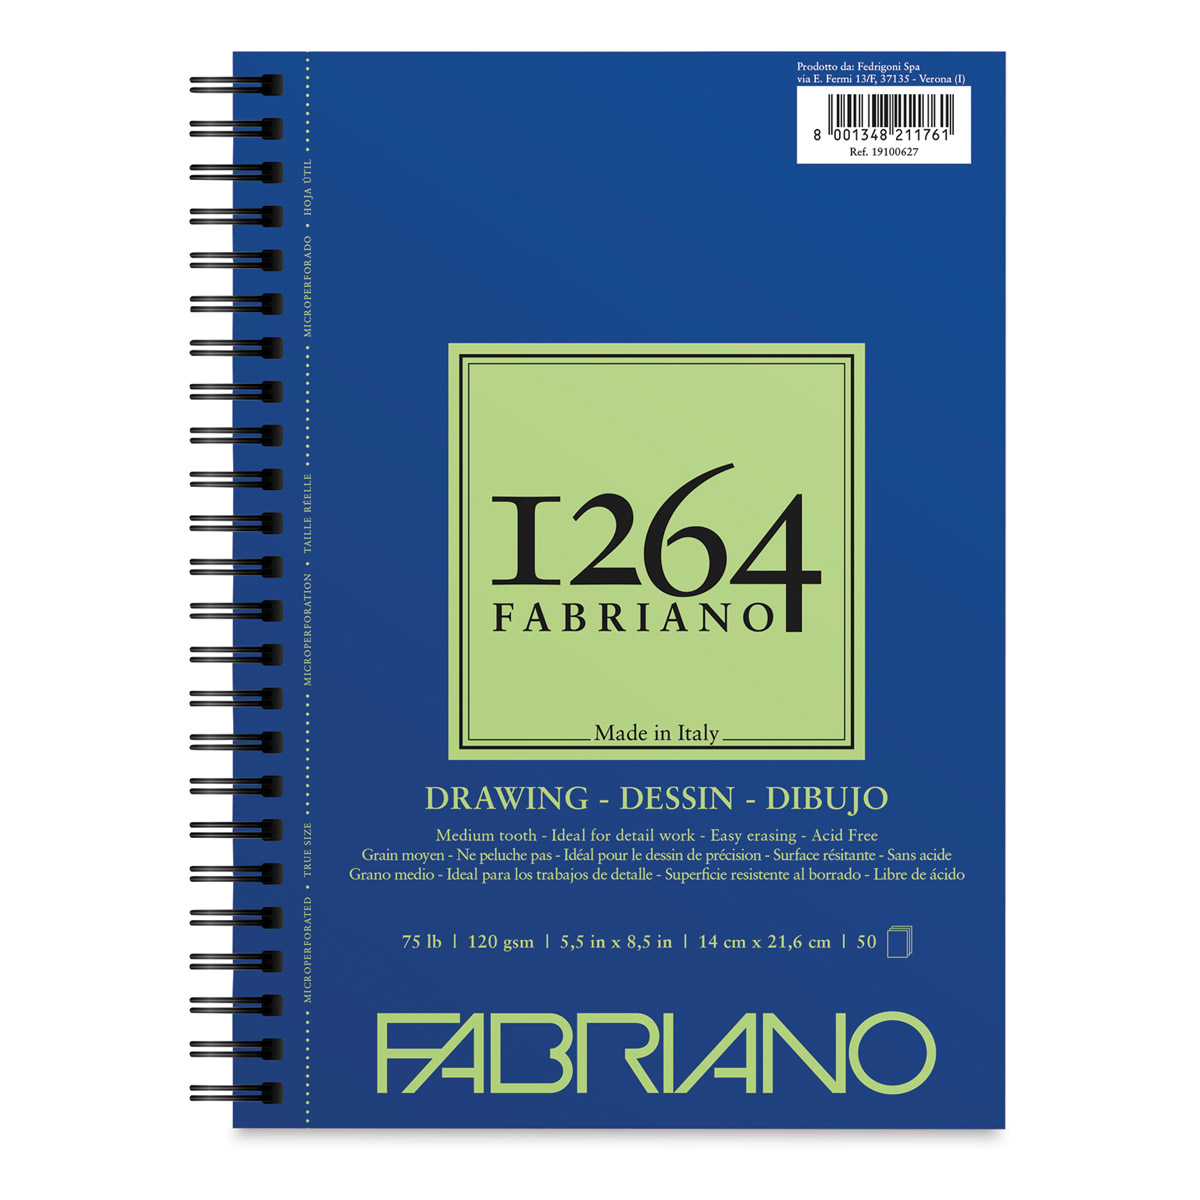 Fabriano Drawing Paper White White Black Black 8 X 8 Paper Smooth Acid Free